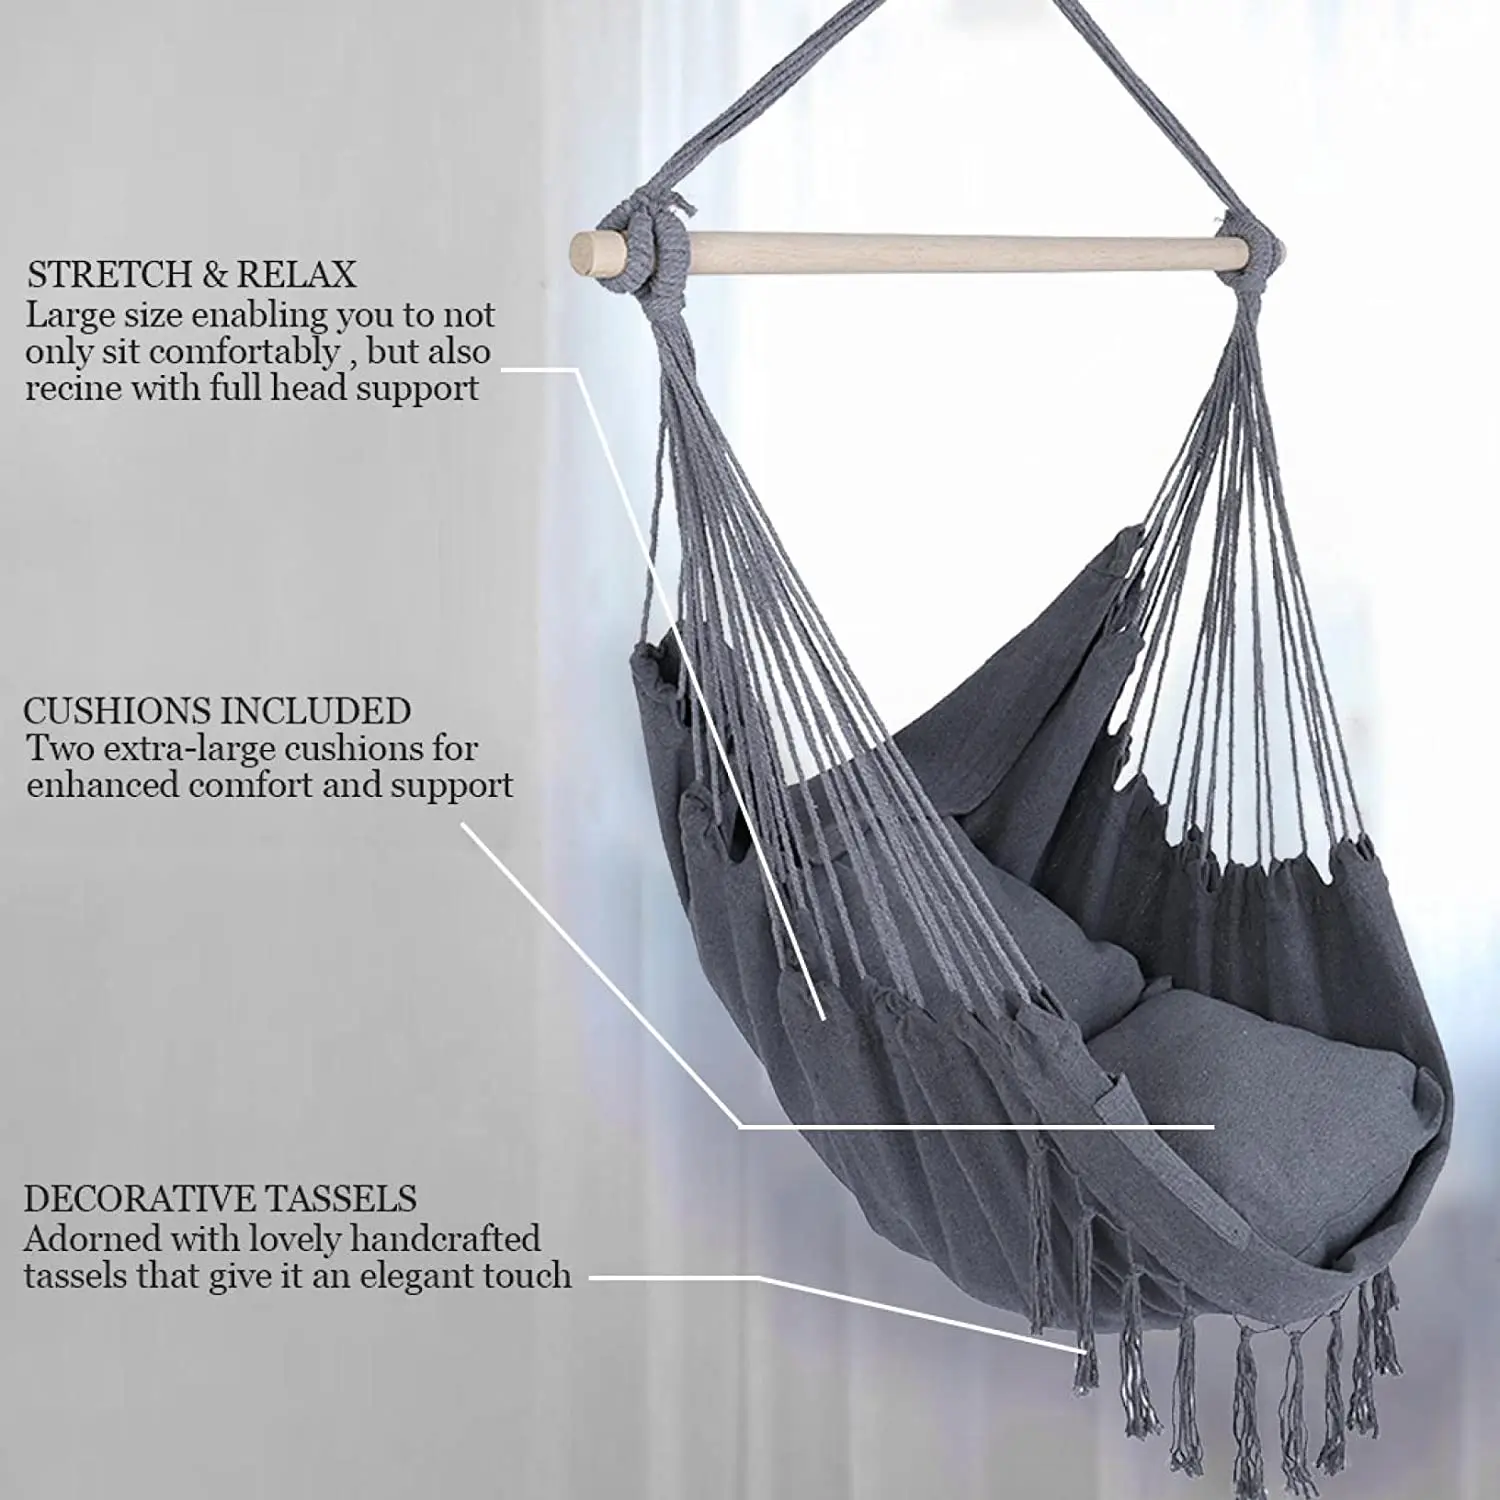 Large Handwoven Cotton Hammock Chair-Max Weight 330 Lbs-Boho Chair with Fringe Tassels for Indoor, Outdoor image_2